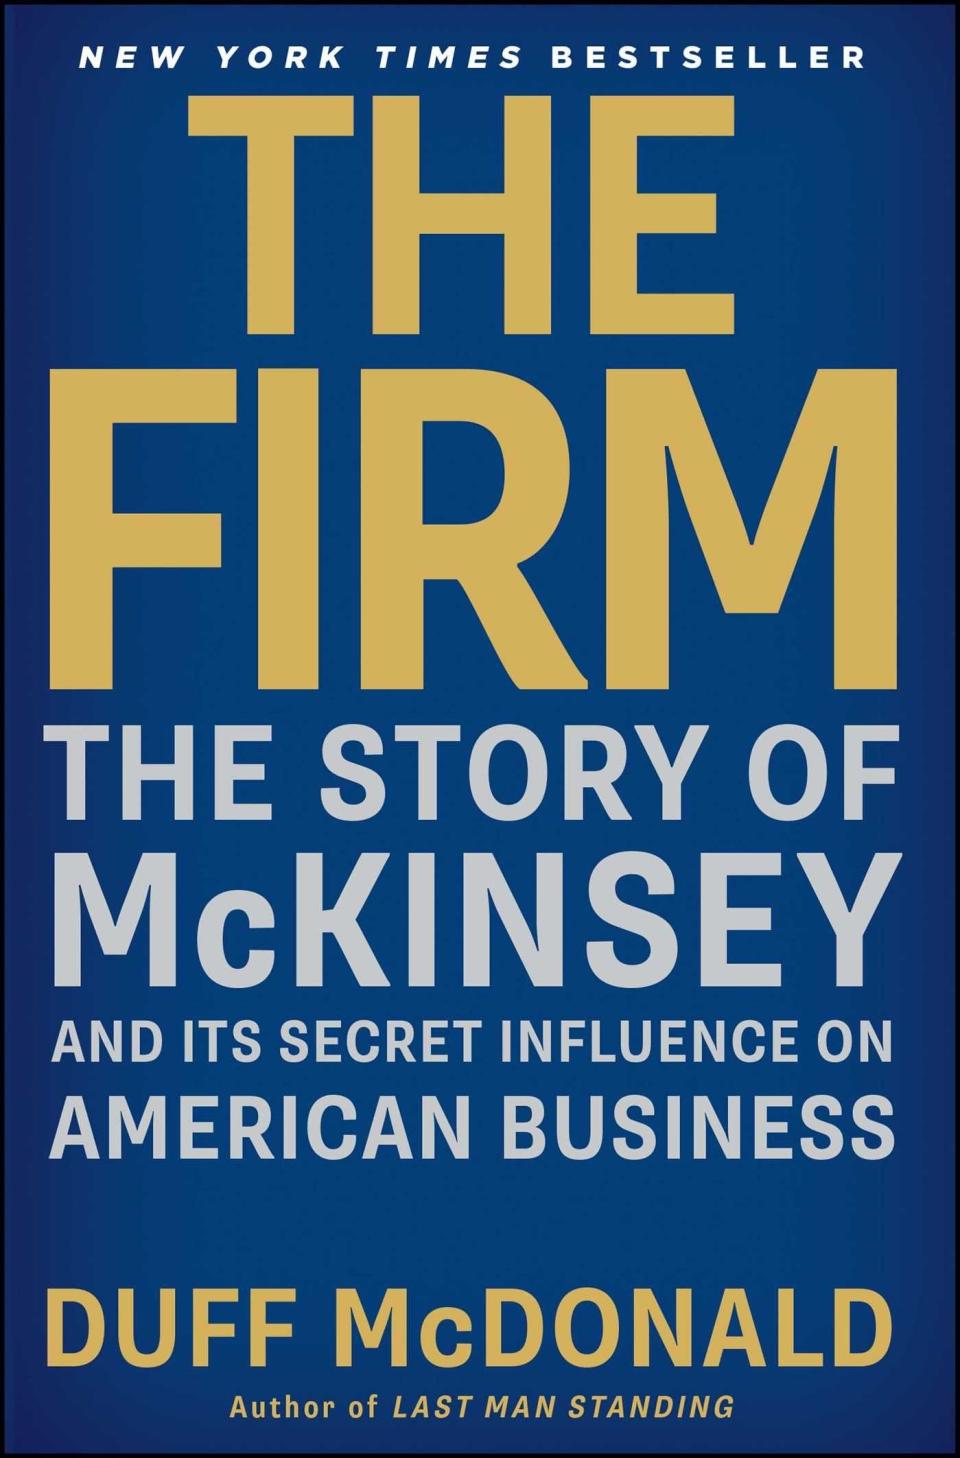 "The Firm  The Story of McKinsey and Its Secret Influence on American Business" by Duff McDonald 